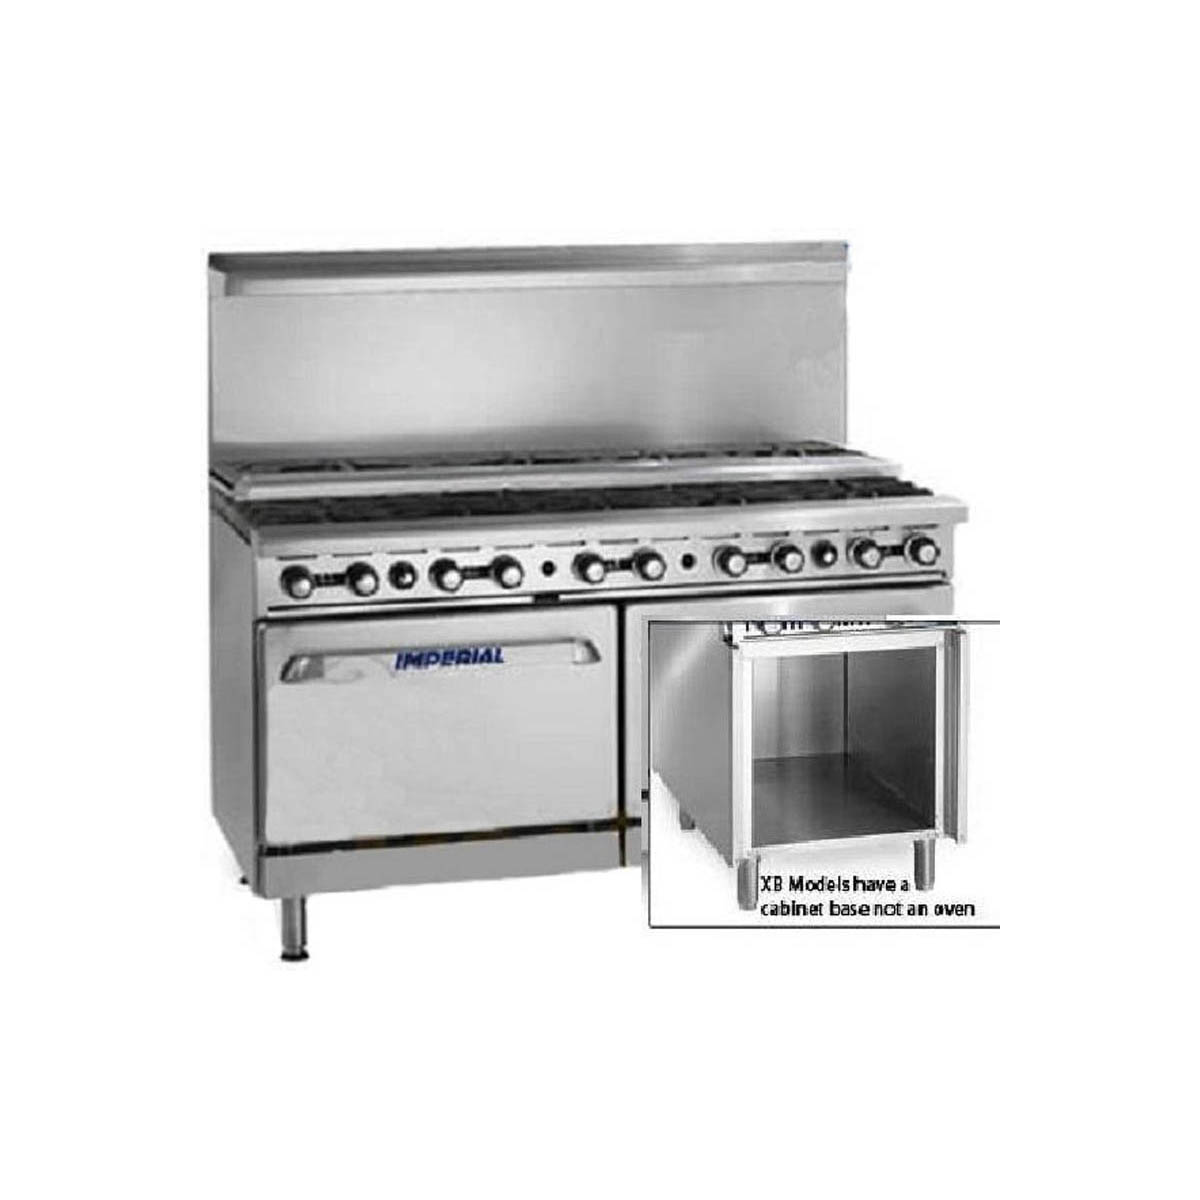 Imperial IR-10-SU-C-XB 60“ Gas Restaurant Range w/ 5 Open Burners, 5 Step-Up Open Burners, Convection Oven, Open Cabinet